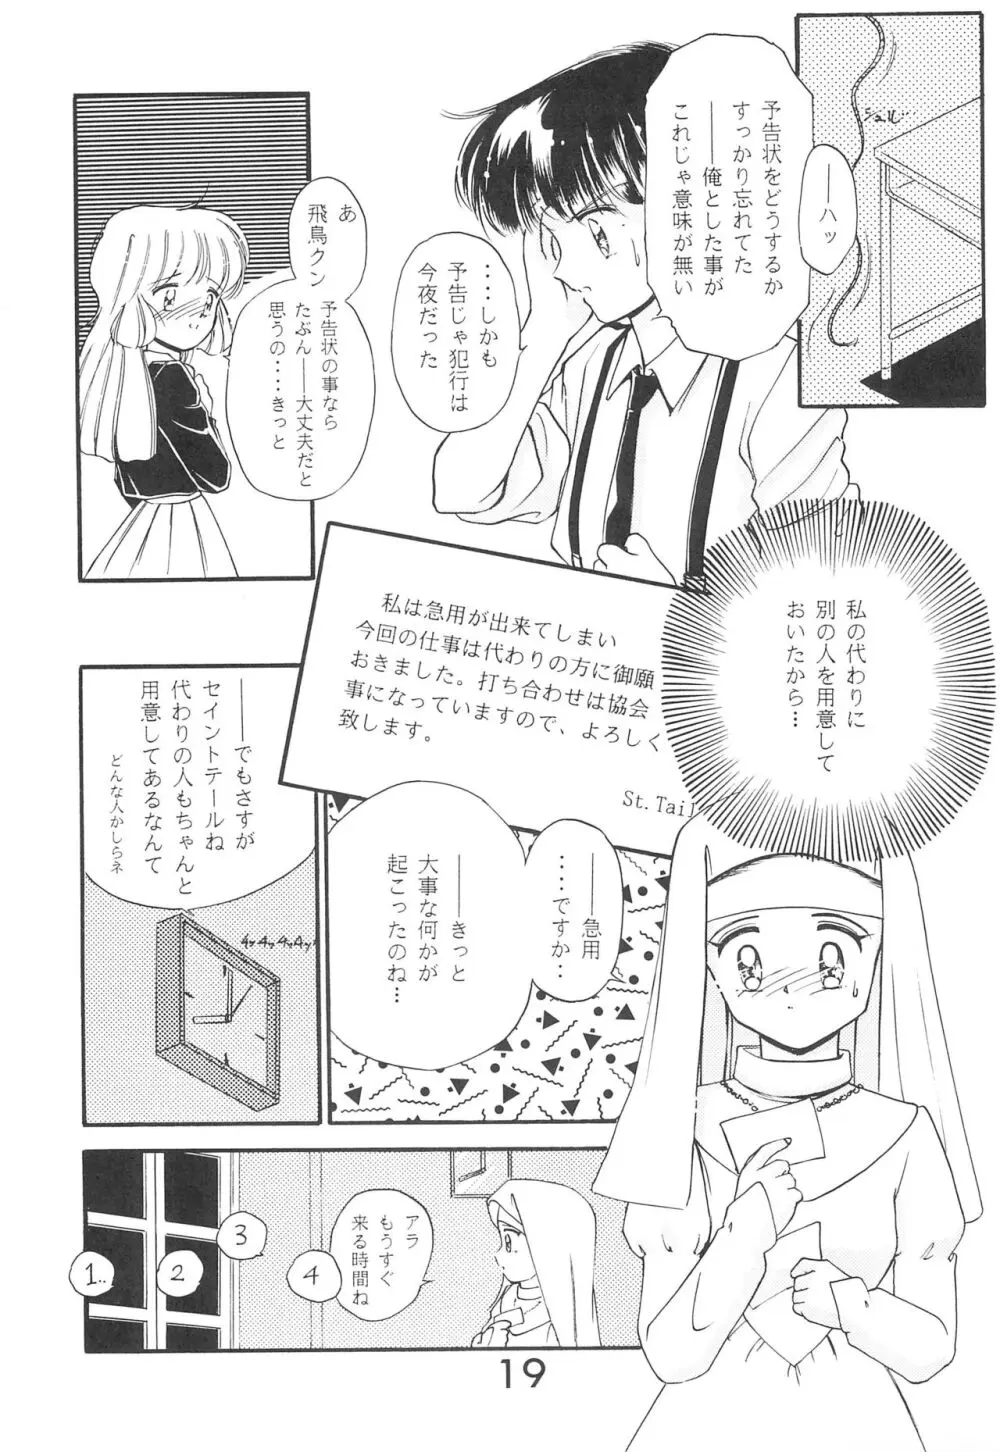 Fun House 9th Chame! - page19